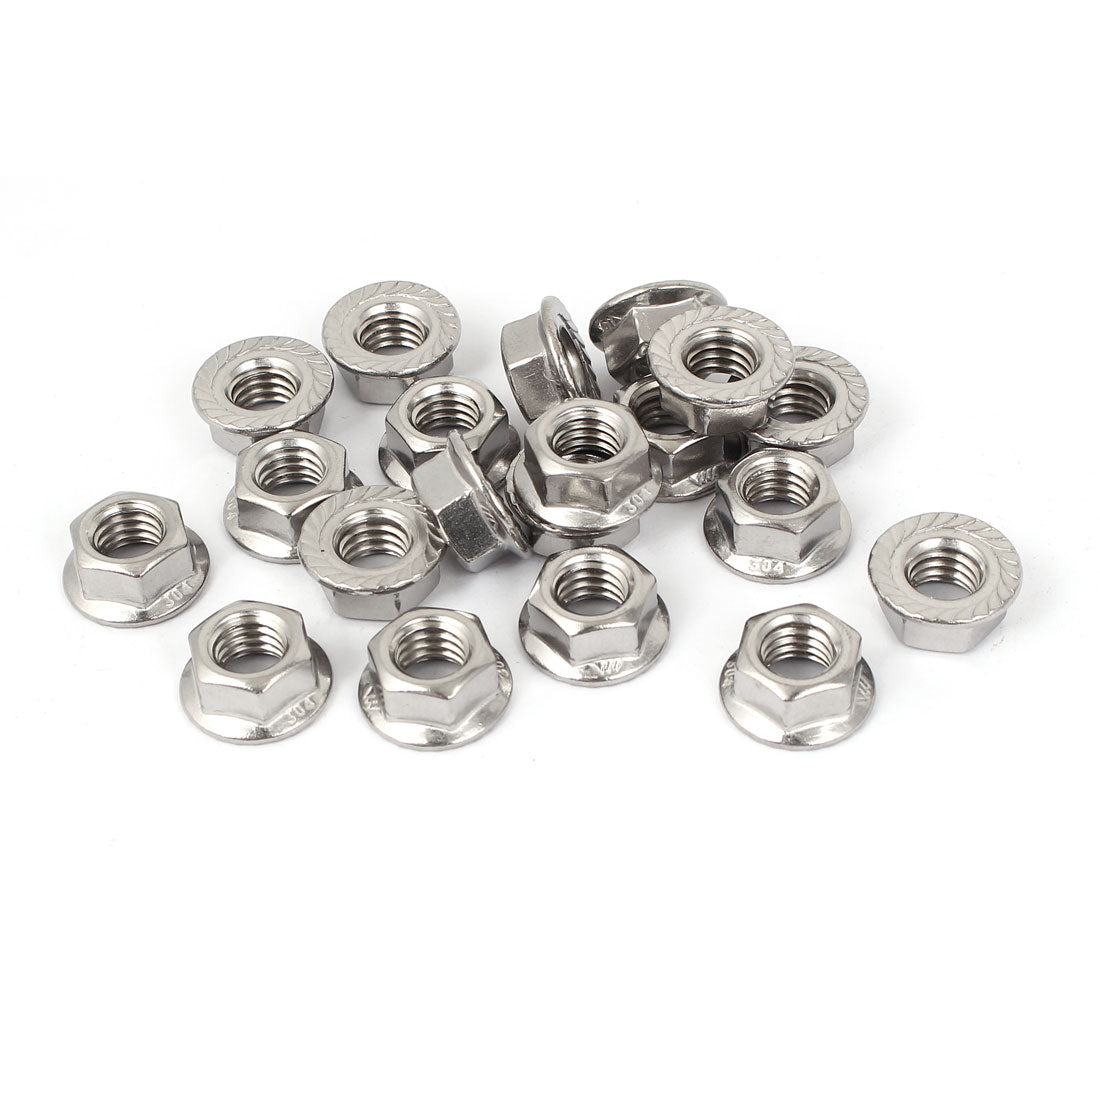 Uxcell Uxcell 3/8"-16 304 Stainless Steel Serrated Hex Flange Lock Nuts 20 Pcs